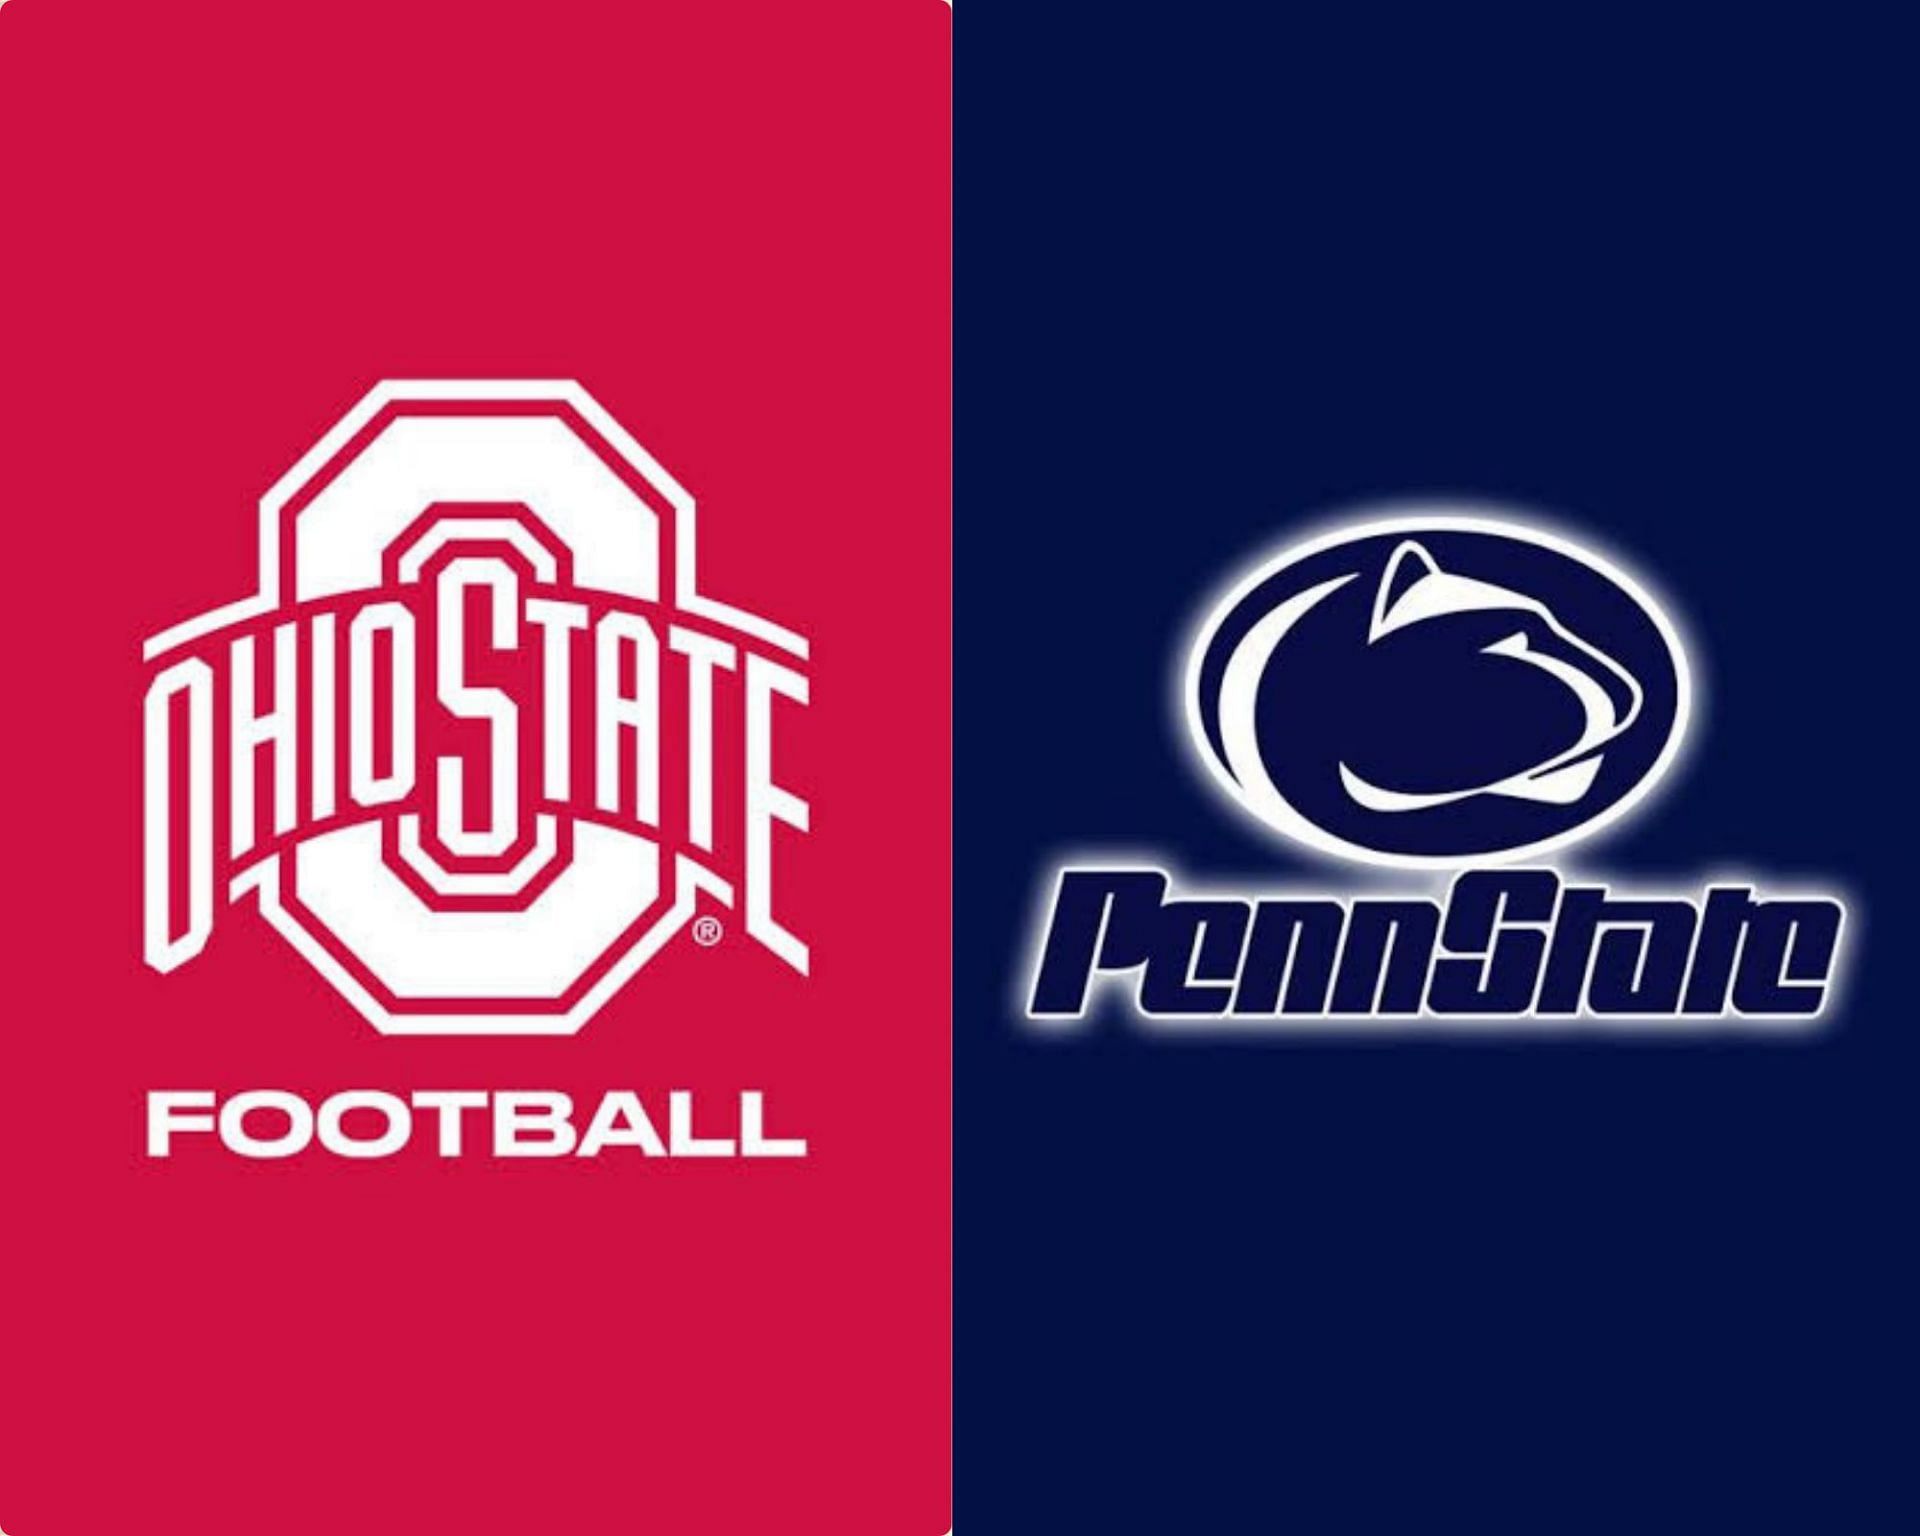 Ohio State vs. Penn State Football History Records, H2H stats and more